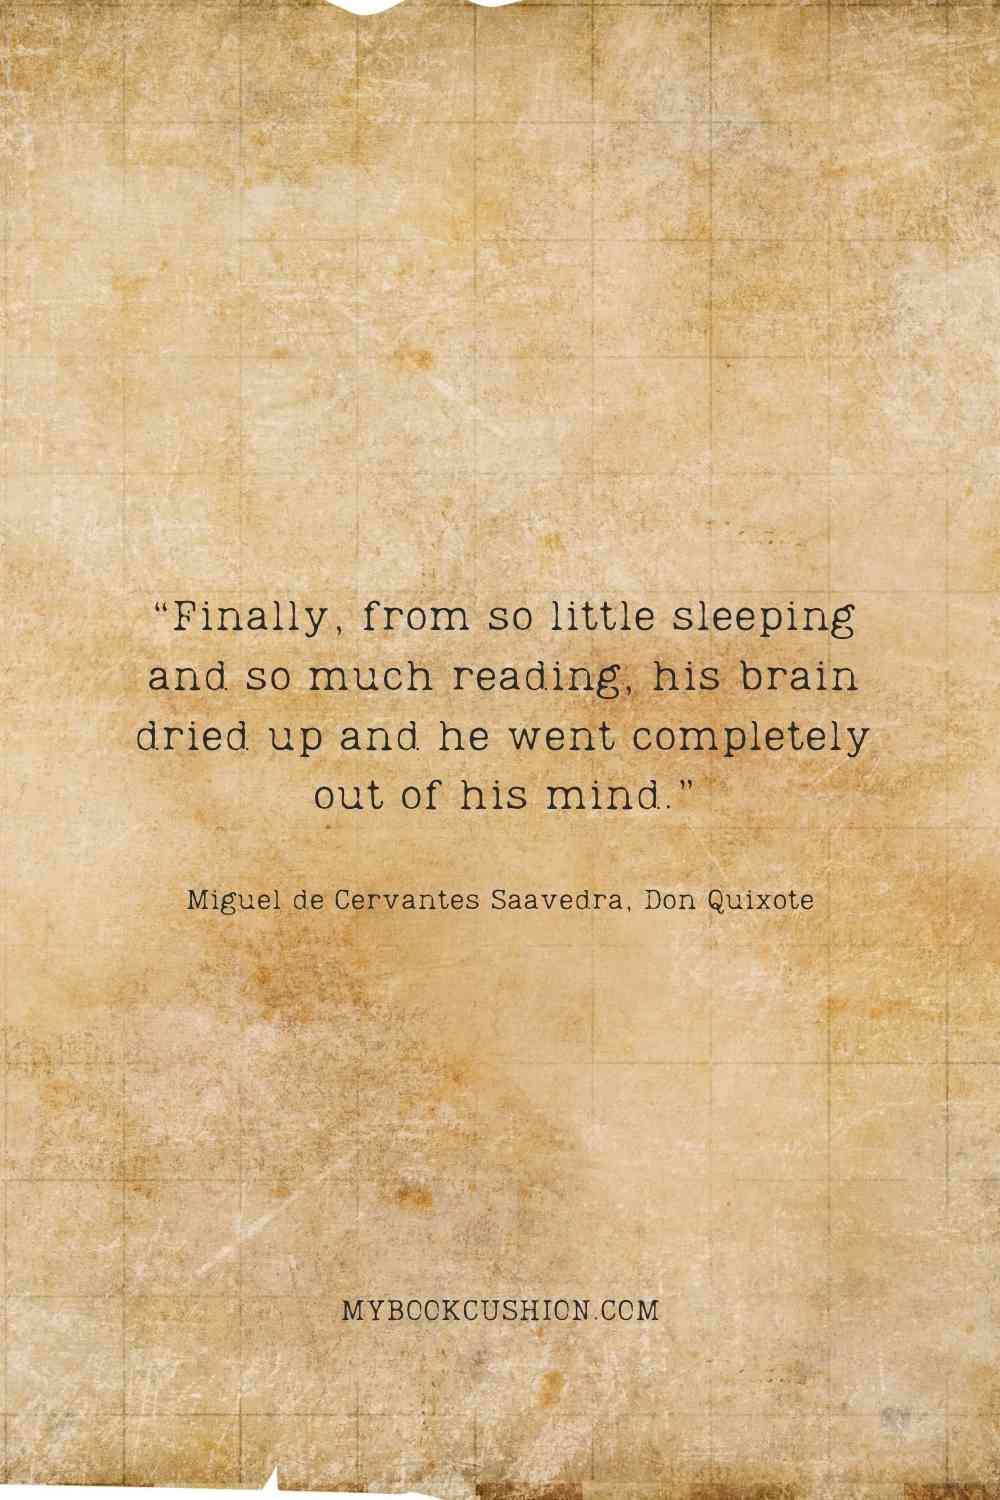 “Finally, from so little sleeping and so much reading, his brain dried up and he went completely out of his mind.” -Miguel de Cervantes Saavedra, Don Quixote